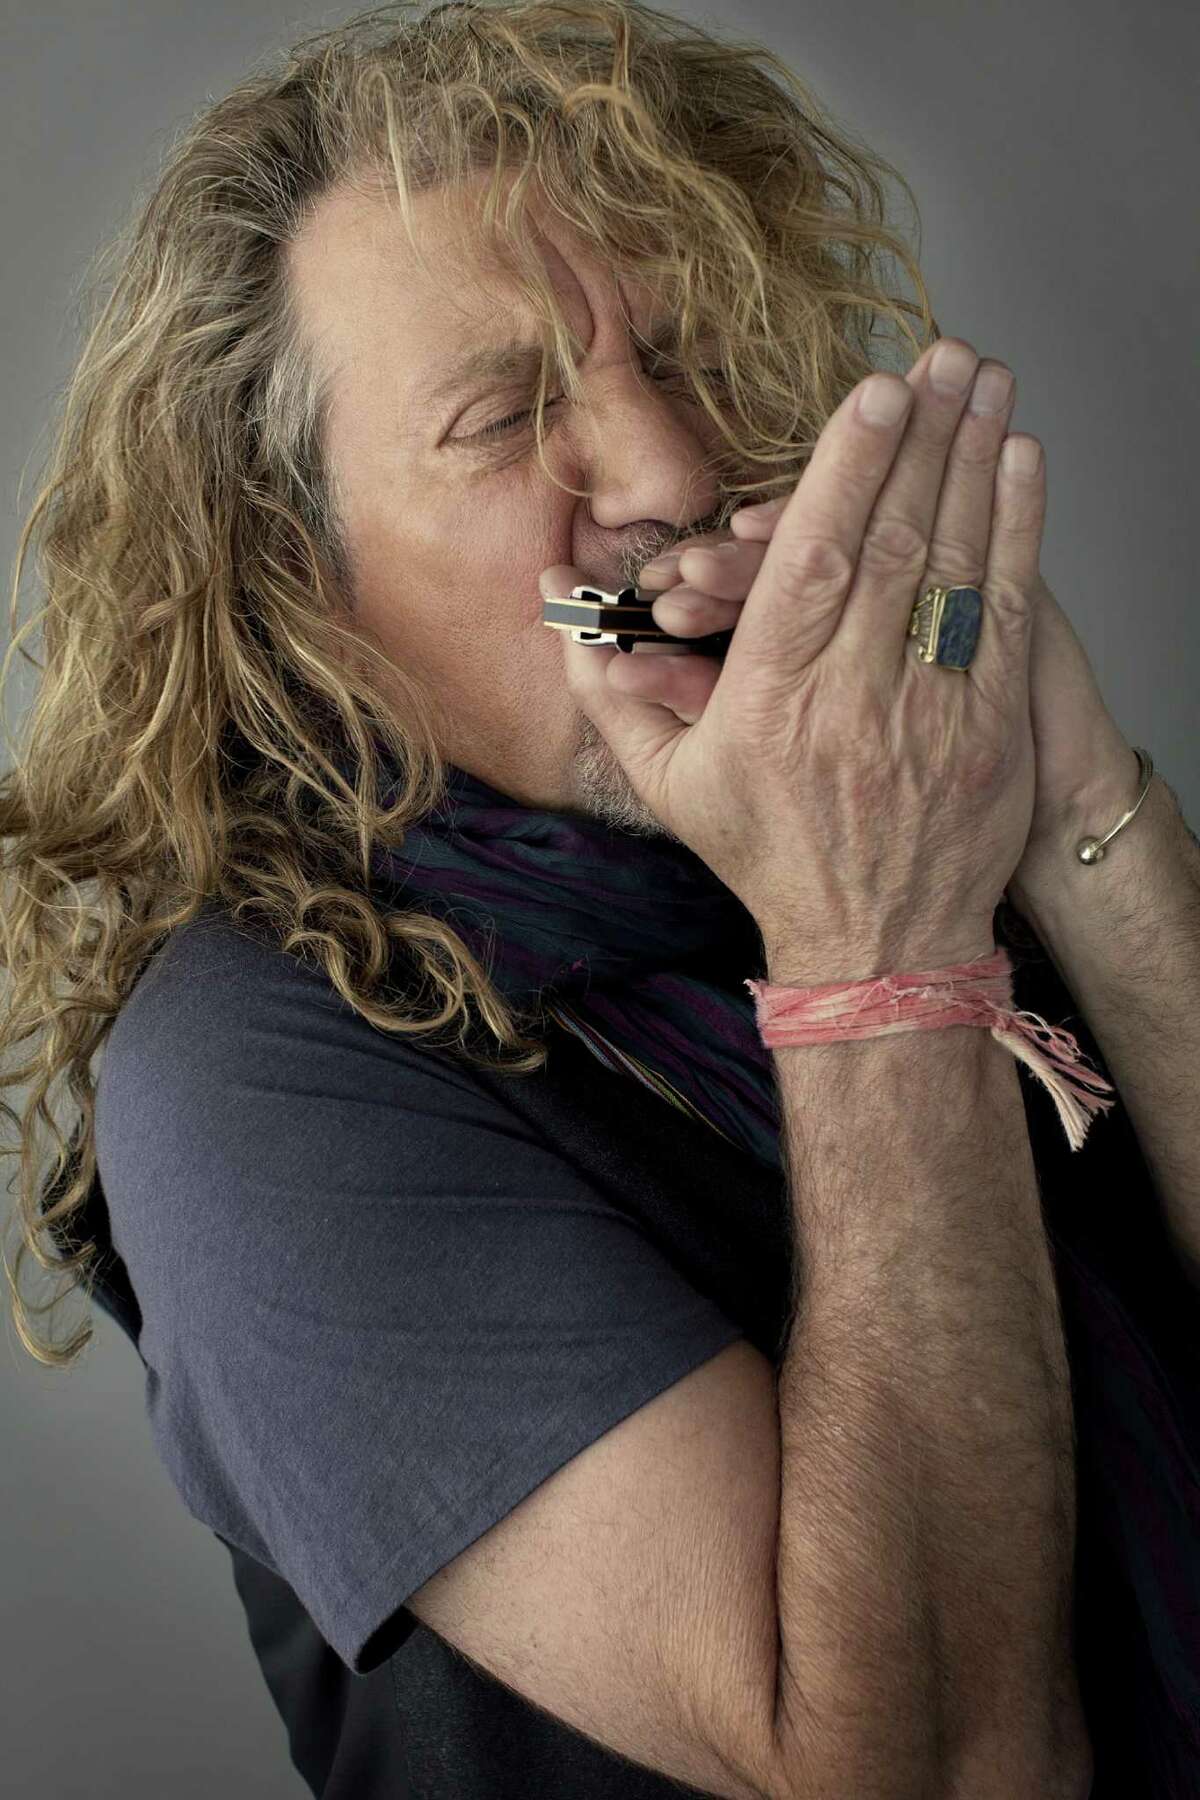 Robert Plant: The harmonica has once again gotten tangled in his hair.